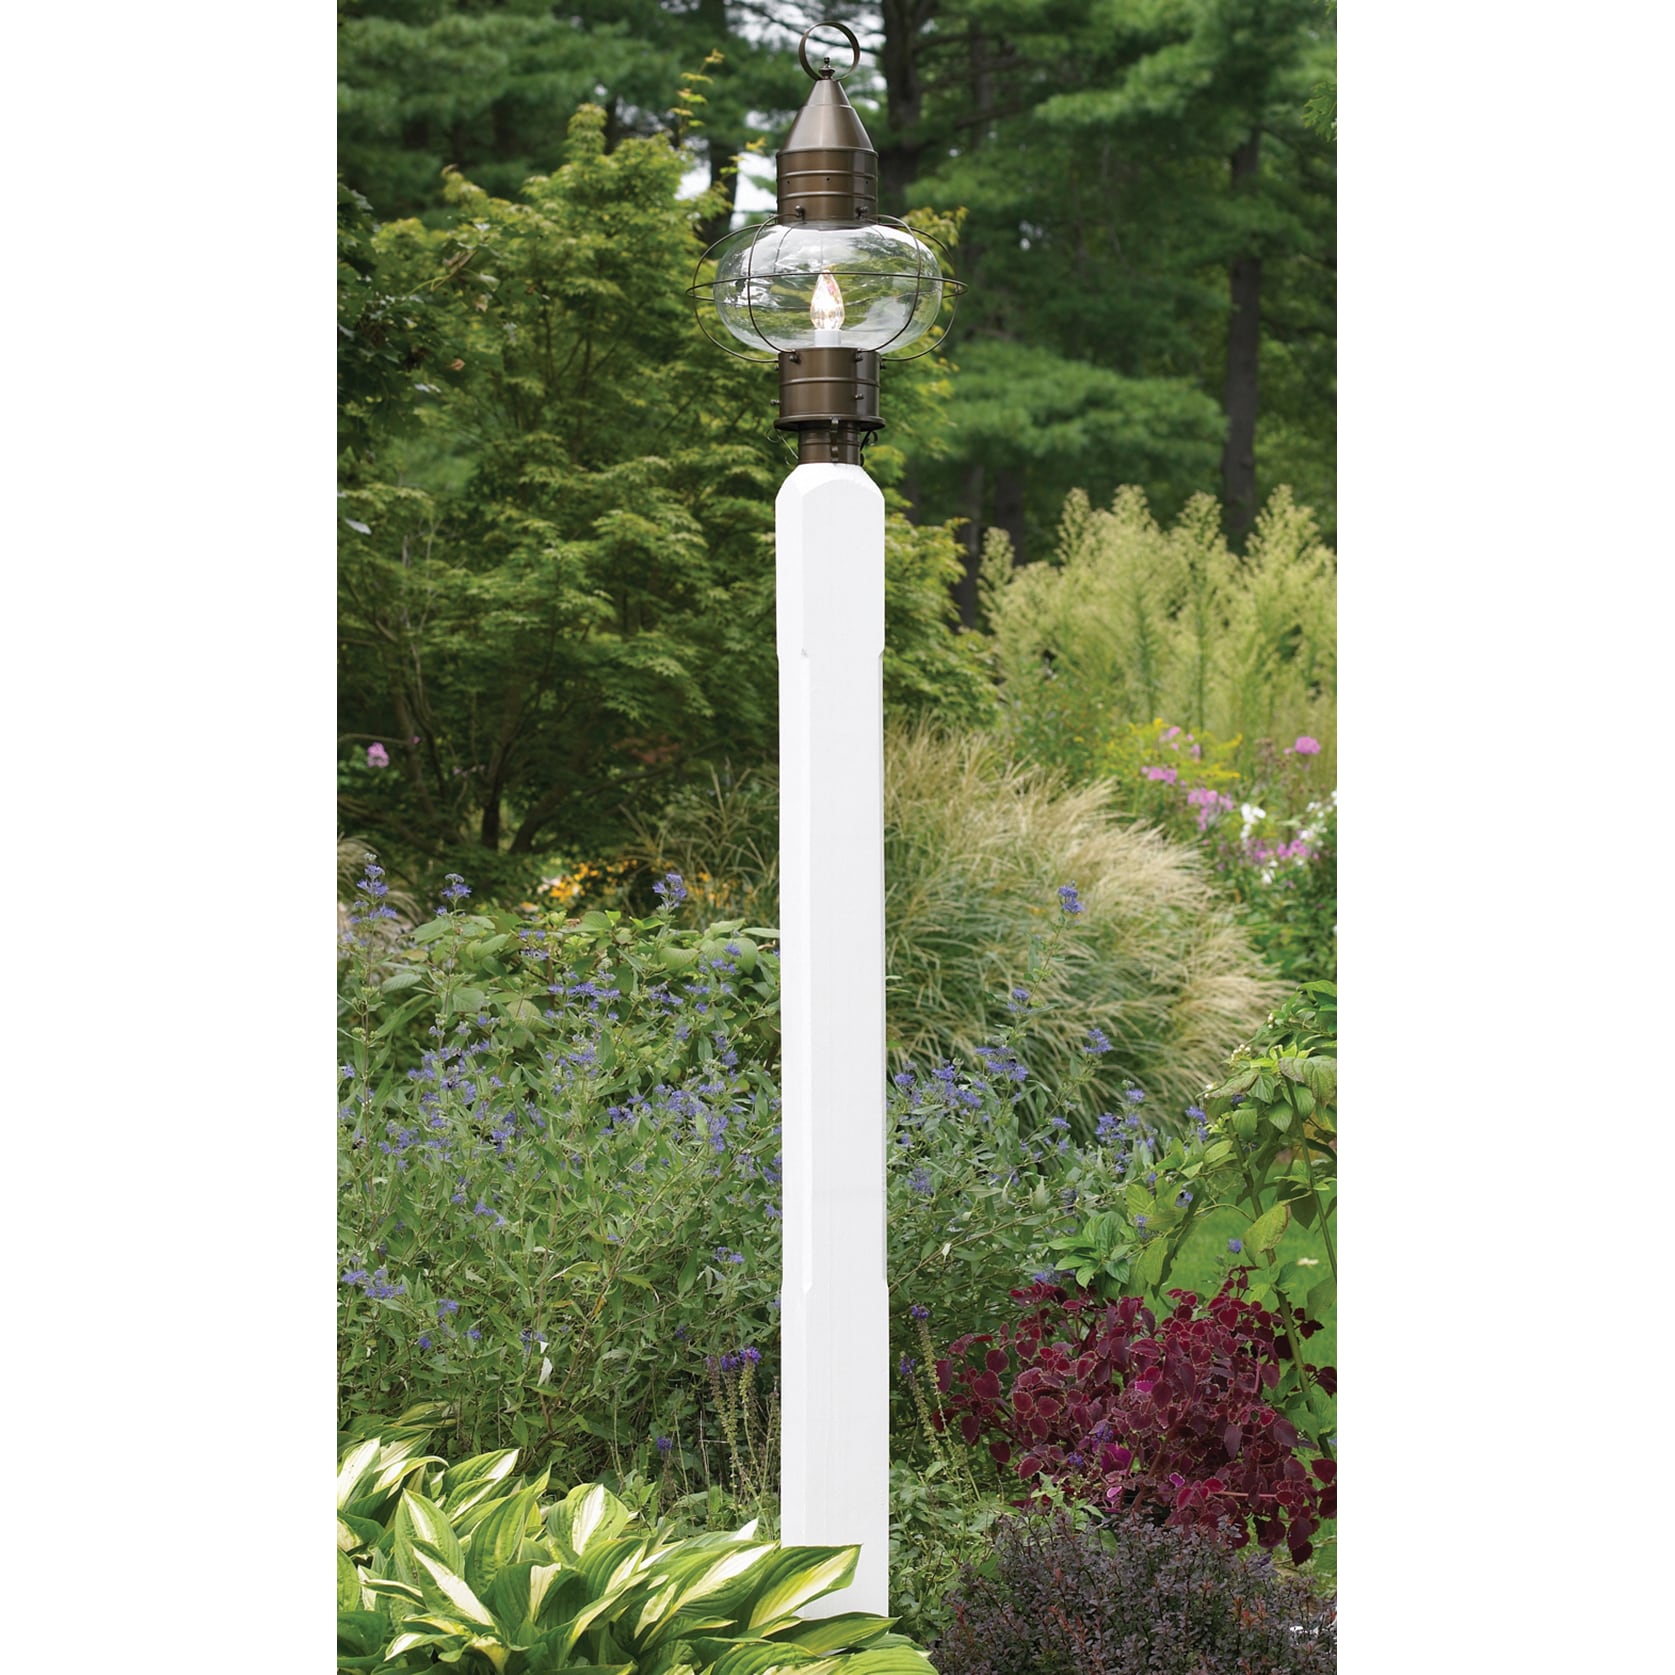 Lazy Hill Farm Designs Revere White Lantern Post (WhiteMaterials CedarQuantity One (1) postSetting OutdoorDimensions 104 inches high x 4.5 inches wide x 4.5 inches longWeight 30 poundsAssembly Required )